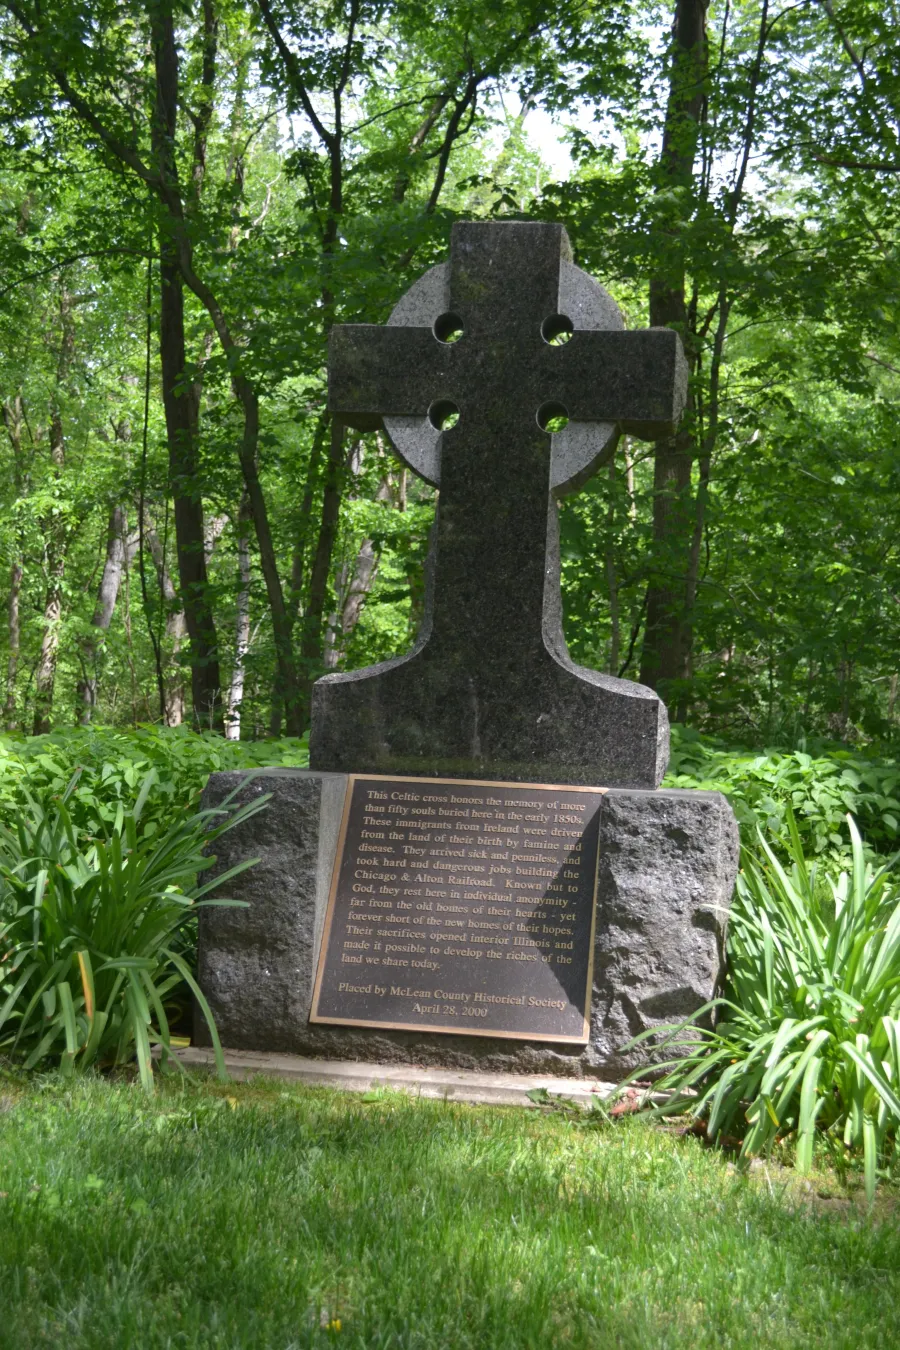 The Irish Rail Workers monument in Funk's Grove commemorates a mass grave of immigrant workers building the railroad into Bloomington in 1853.